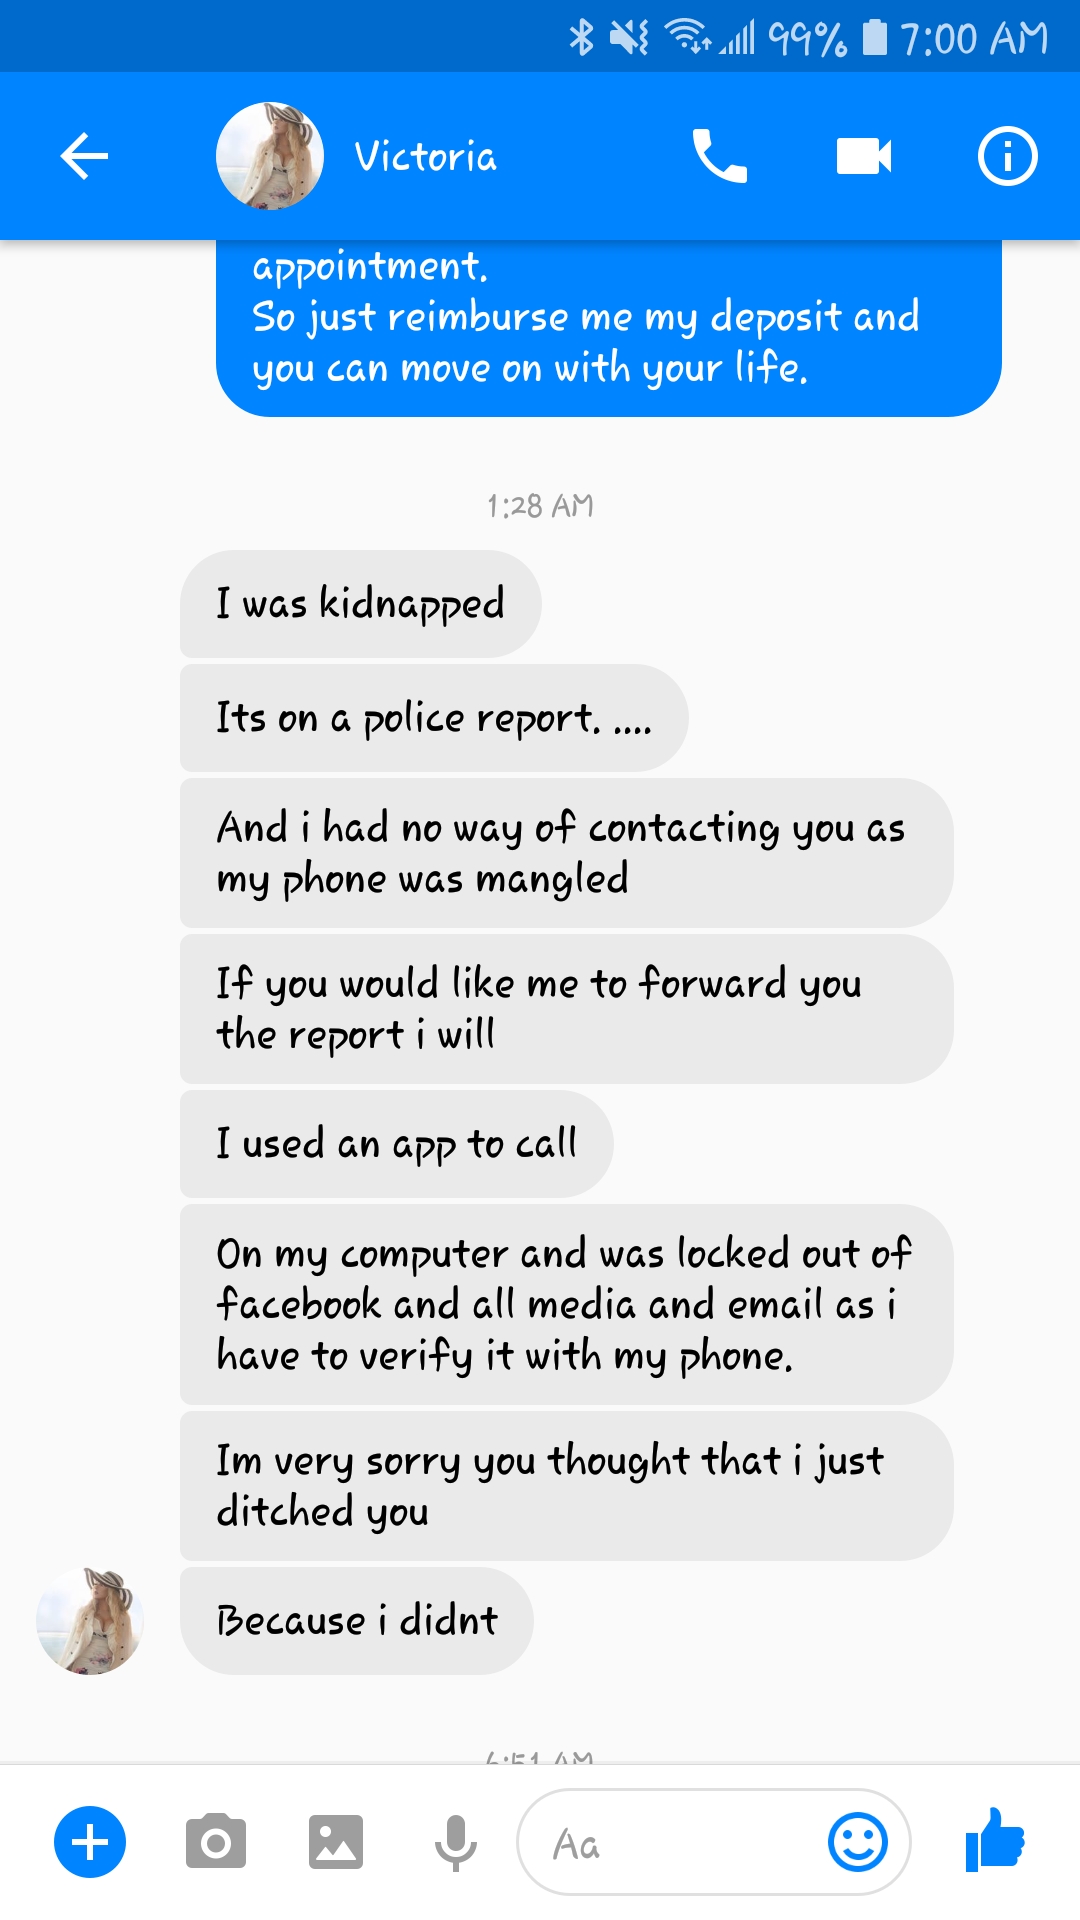 Part 3. Claiming she was kidnapped. 